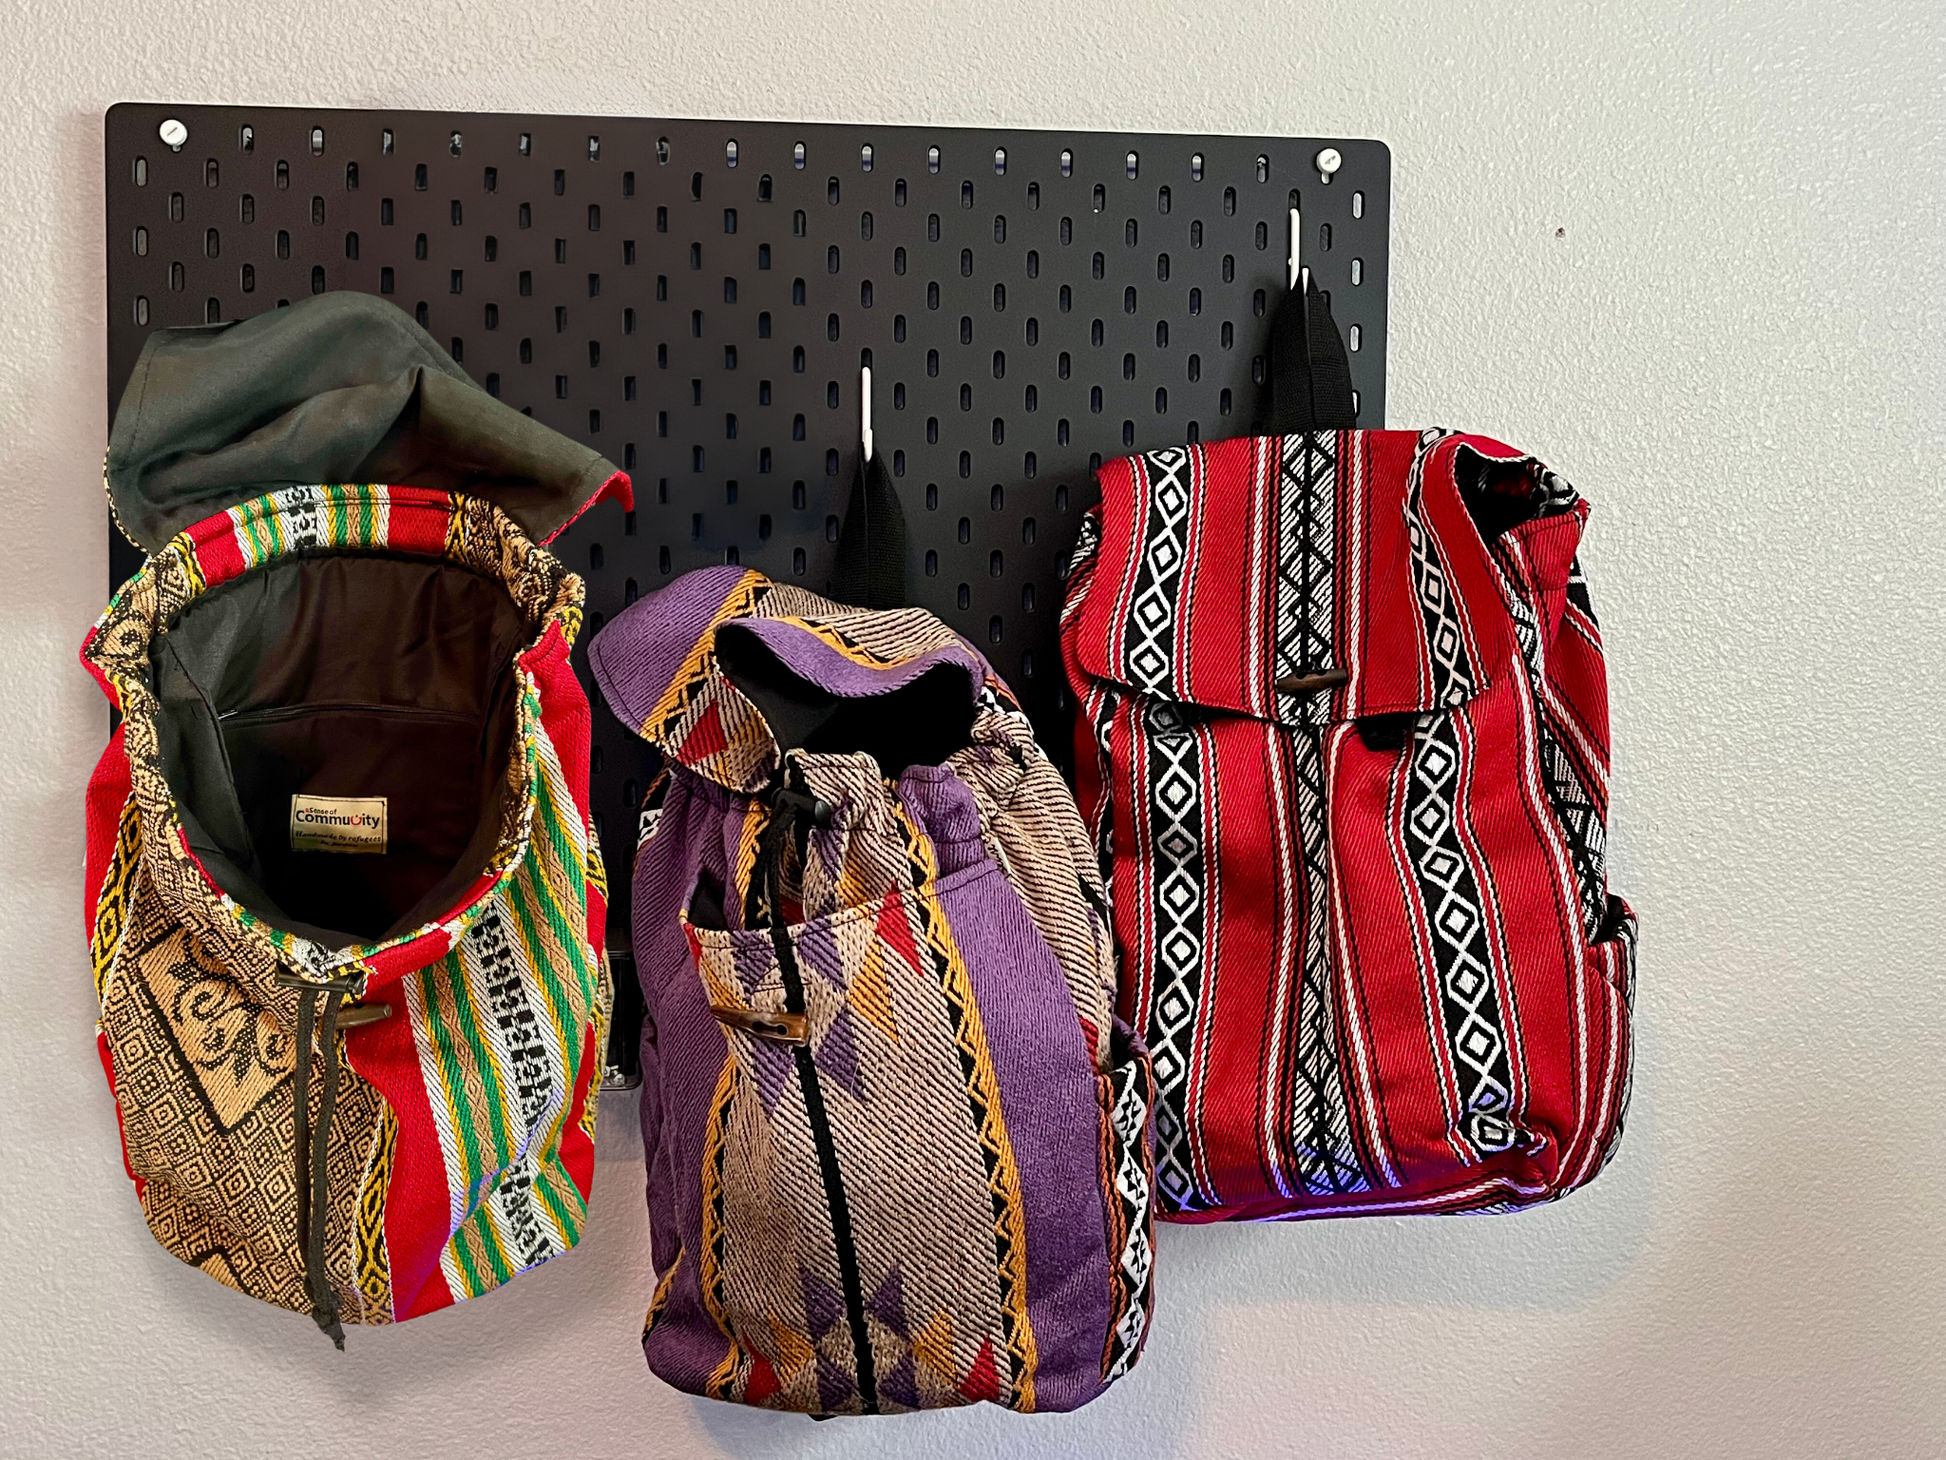 The Artisan's Journey Backpack comes in three styles: The Sands of Time, Desert Night, and Sheesha Red